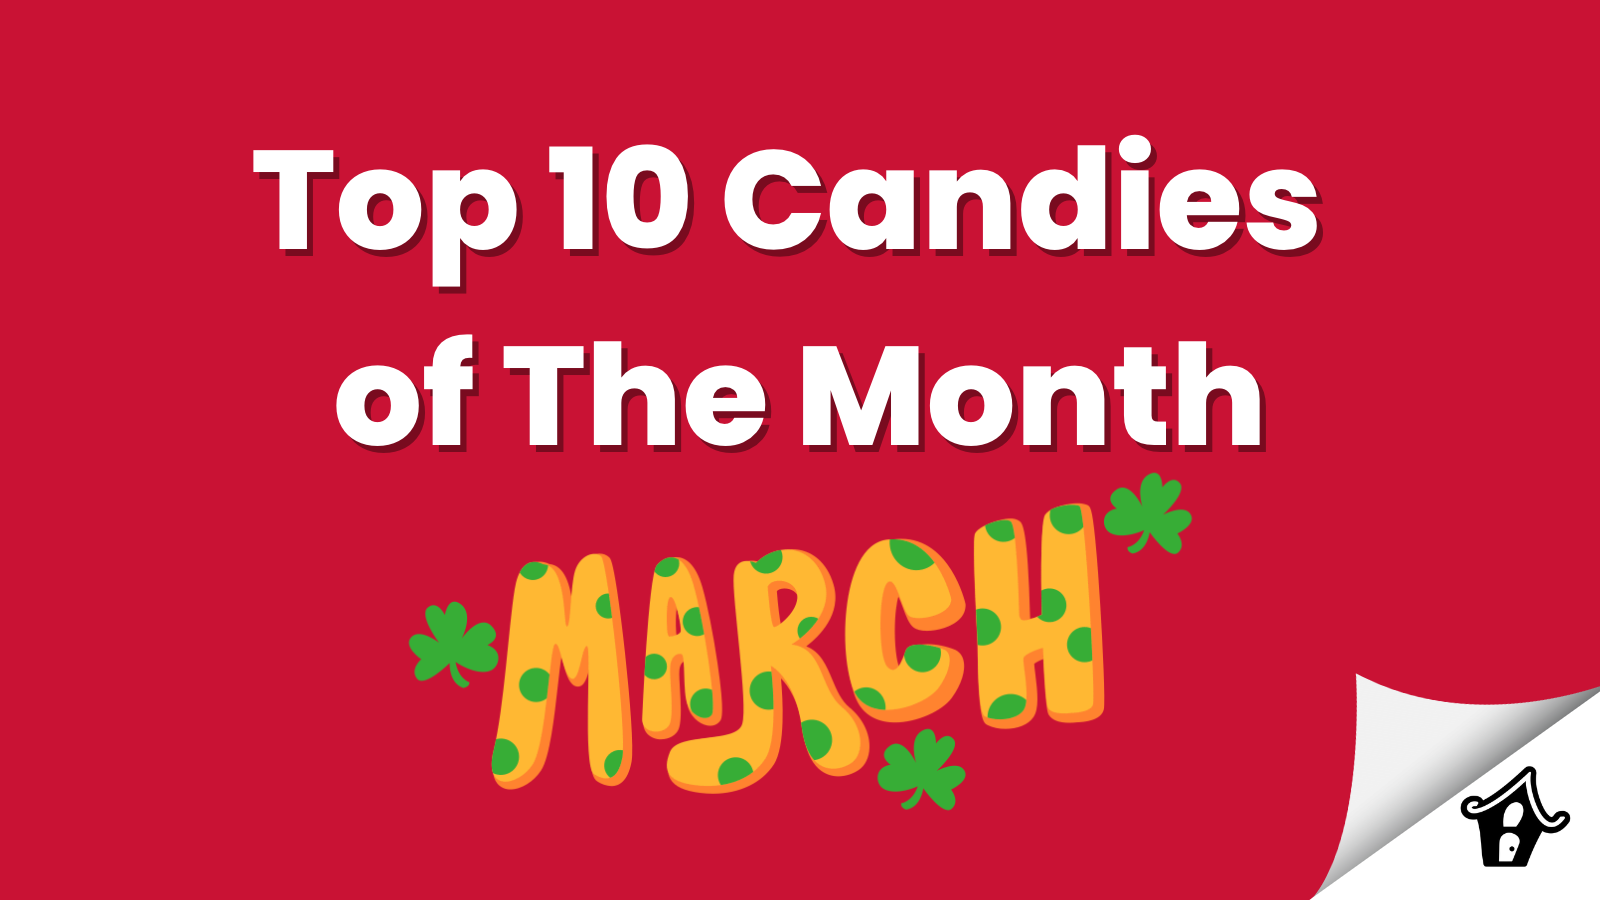 Top 10 Candies of The Month - March